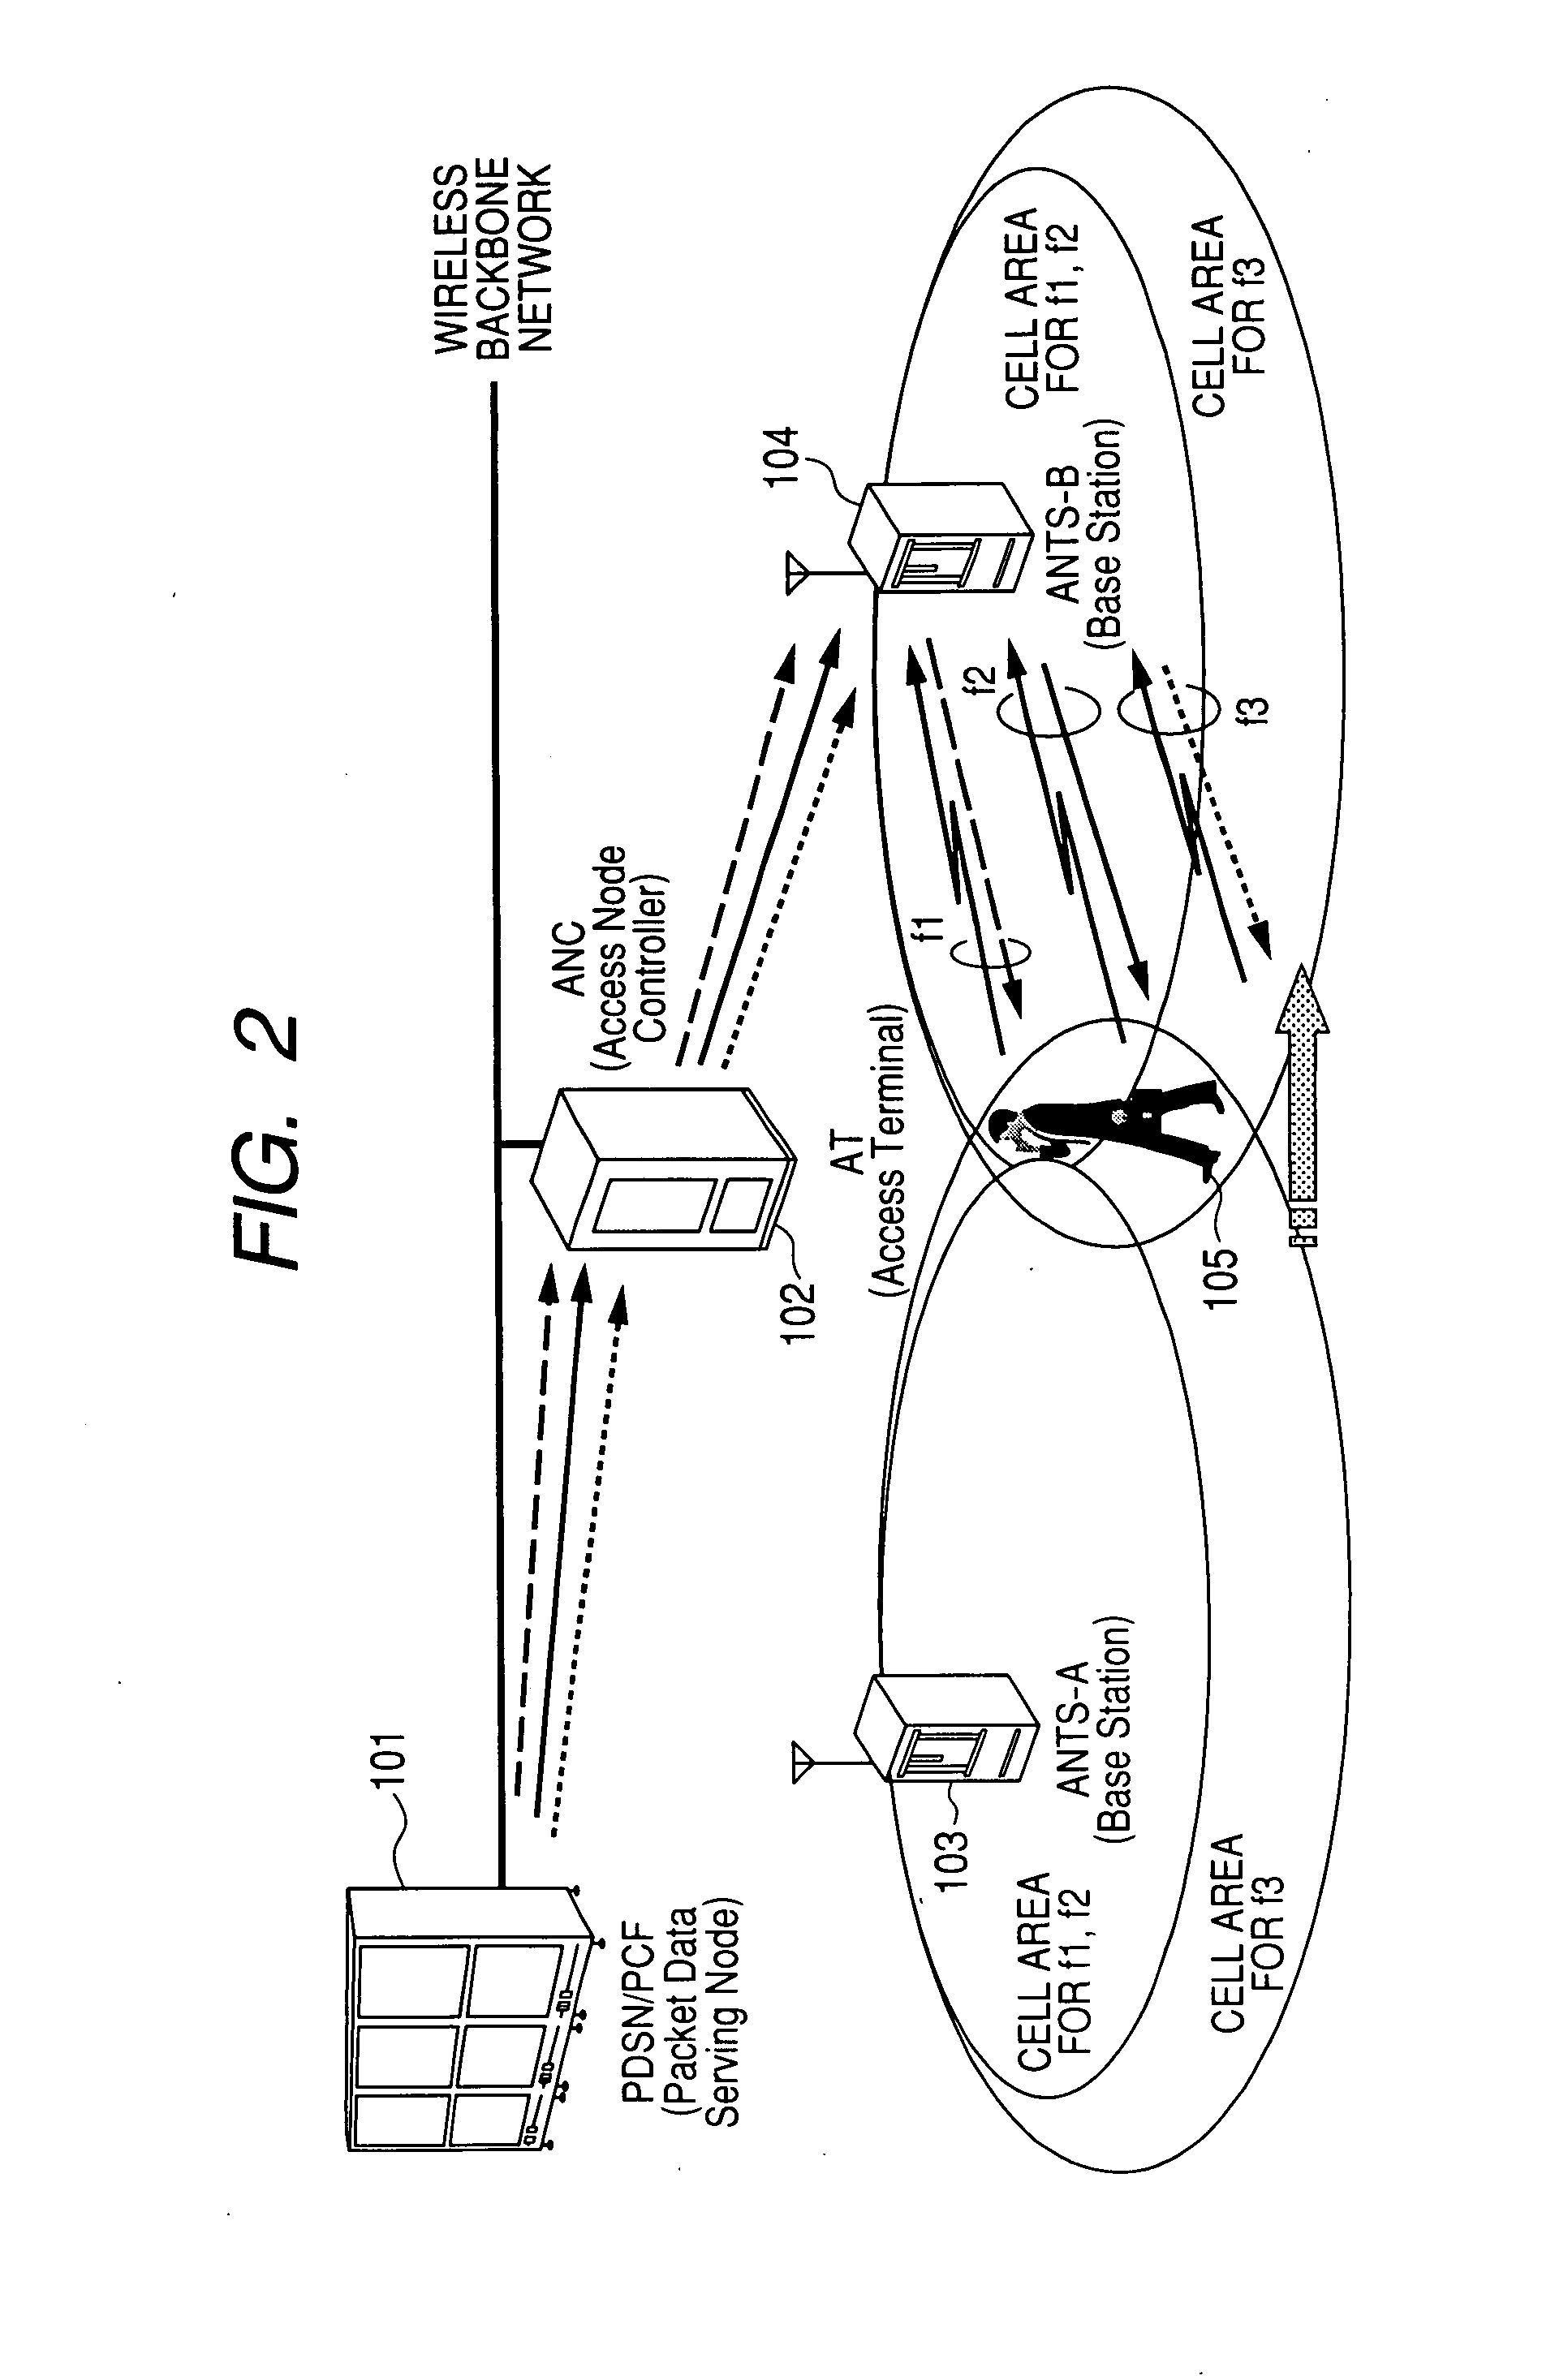 Handoff method for communication system using multiple wireless resources